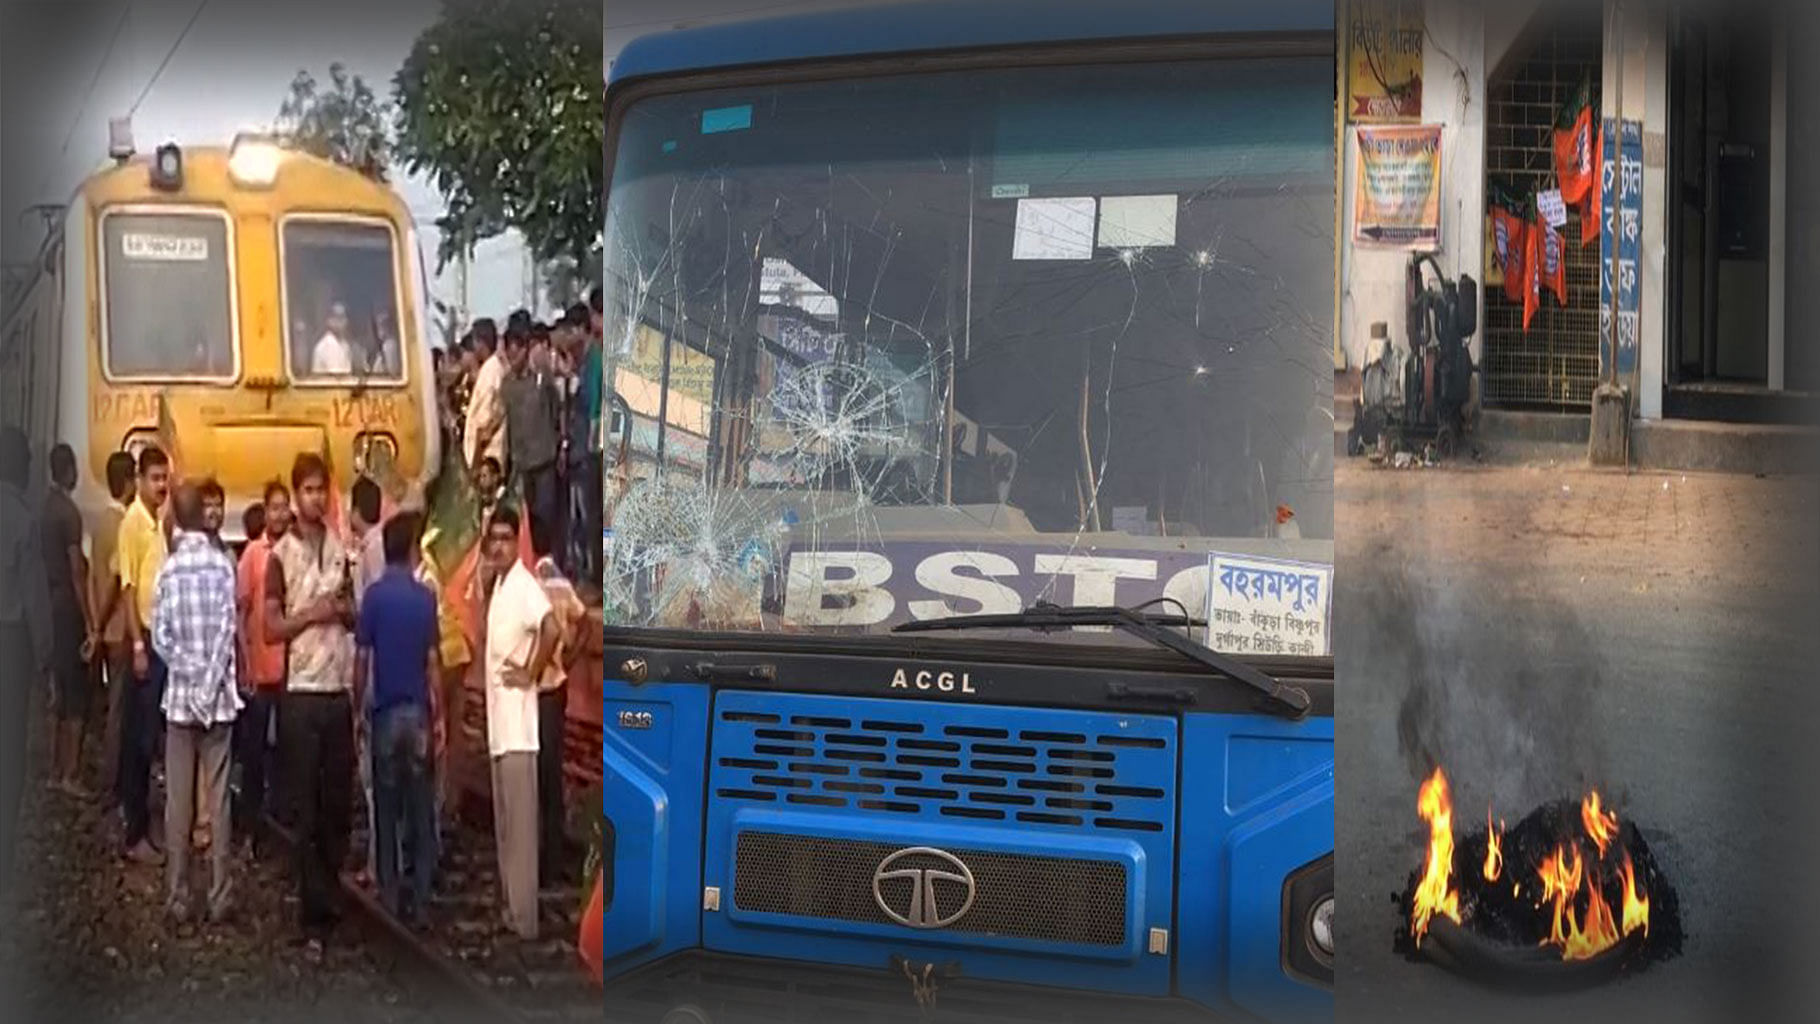 The BJP has called for a 12-hour bandh in West Bengal. Buses have been vandalised and train services obstructed in several parts of the state.